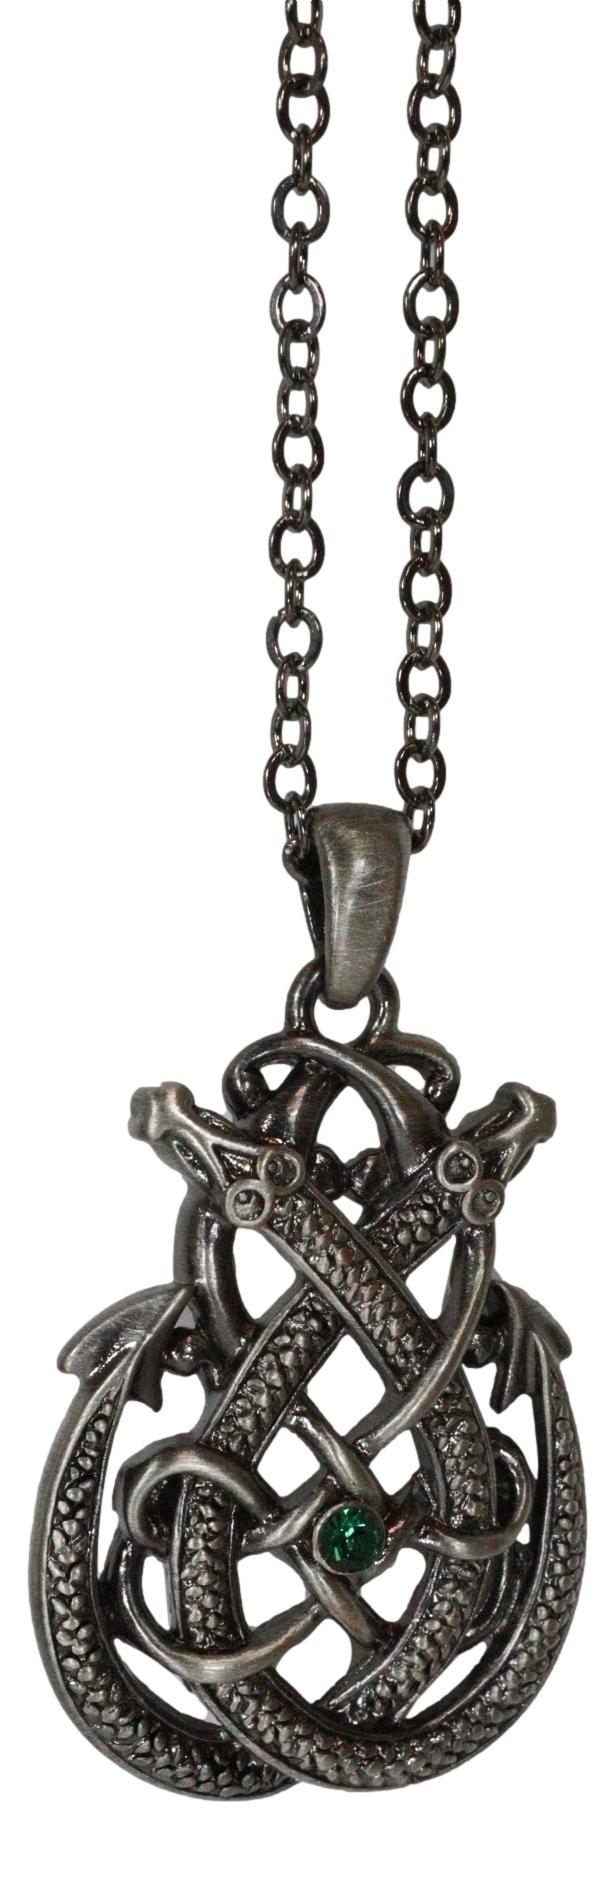 Celtic Knotwork Twin Draco Fearsome Serpentine Dragons Pewter Jewelry Necklace